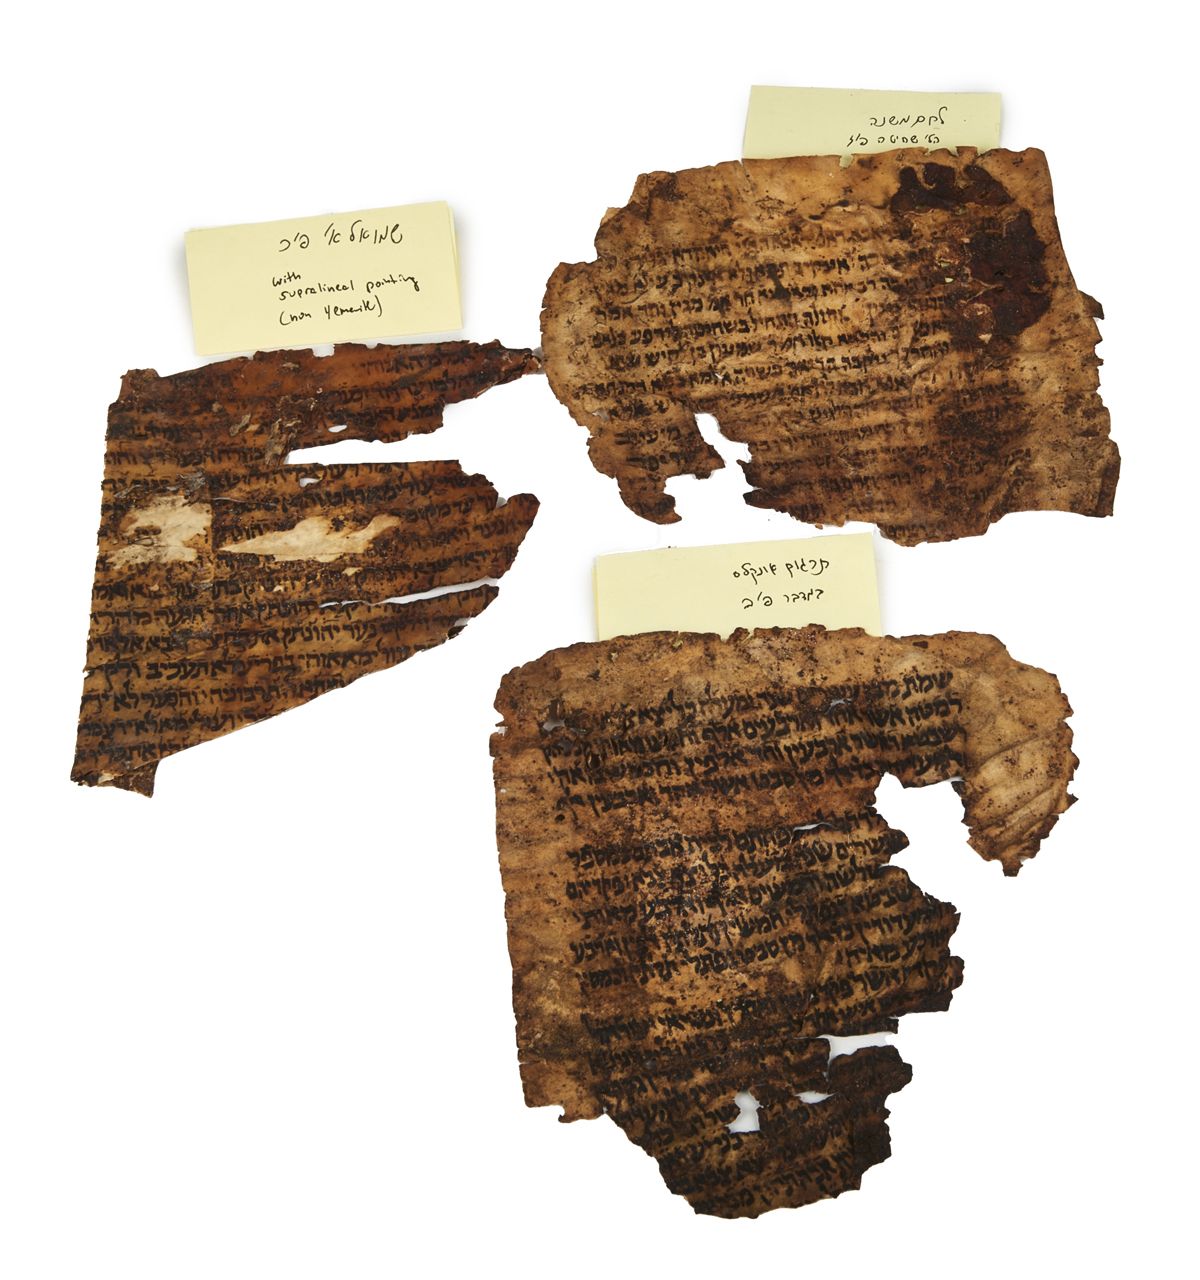 Group of early Hebrew manuscript fragments recovered from book-bindings.